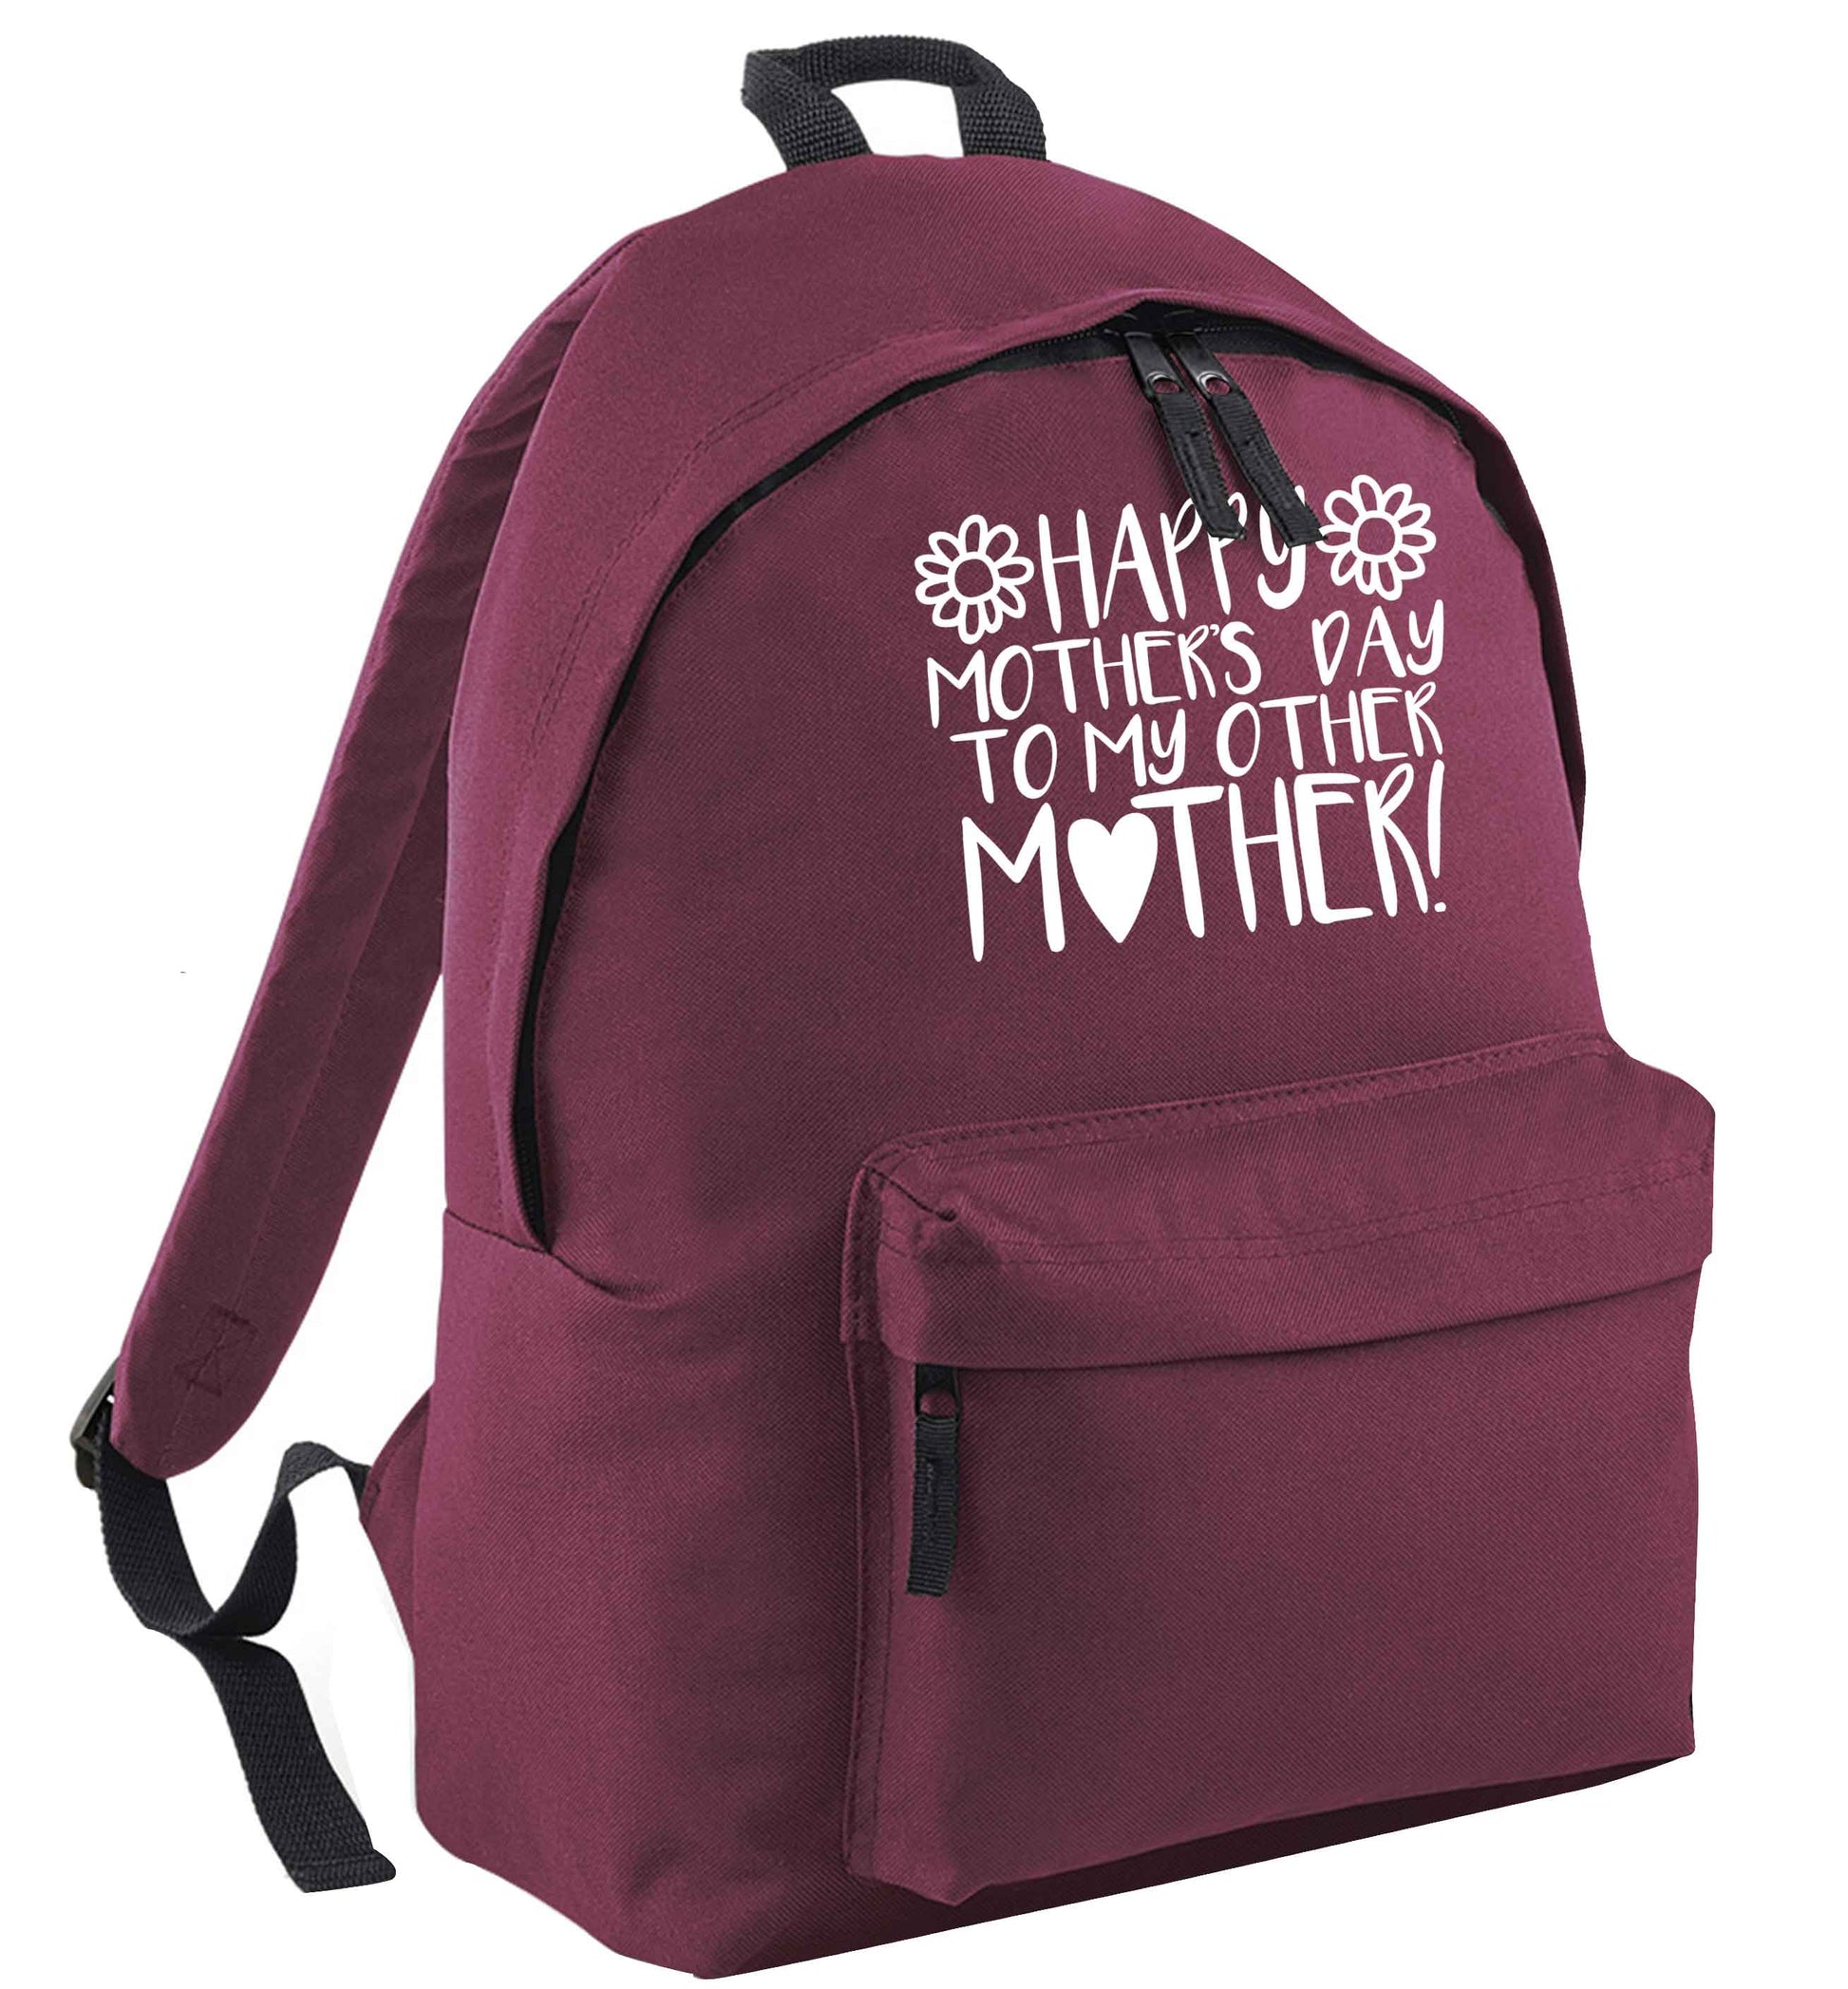 Happy mother's day to my other mother black childrens backpack